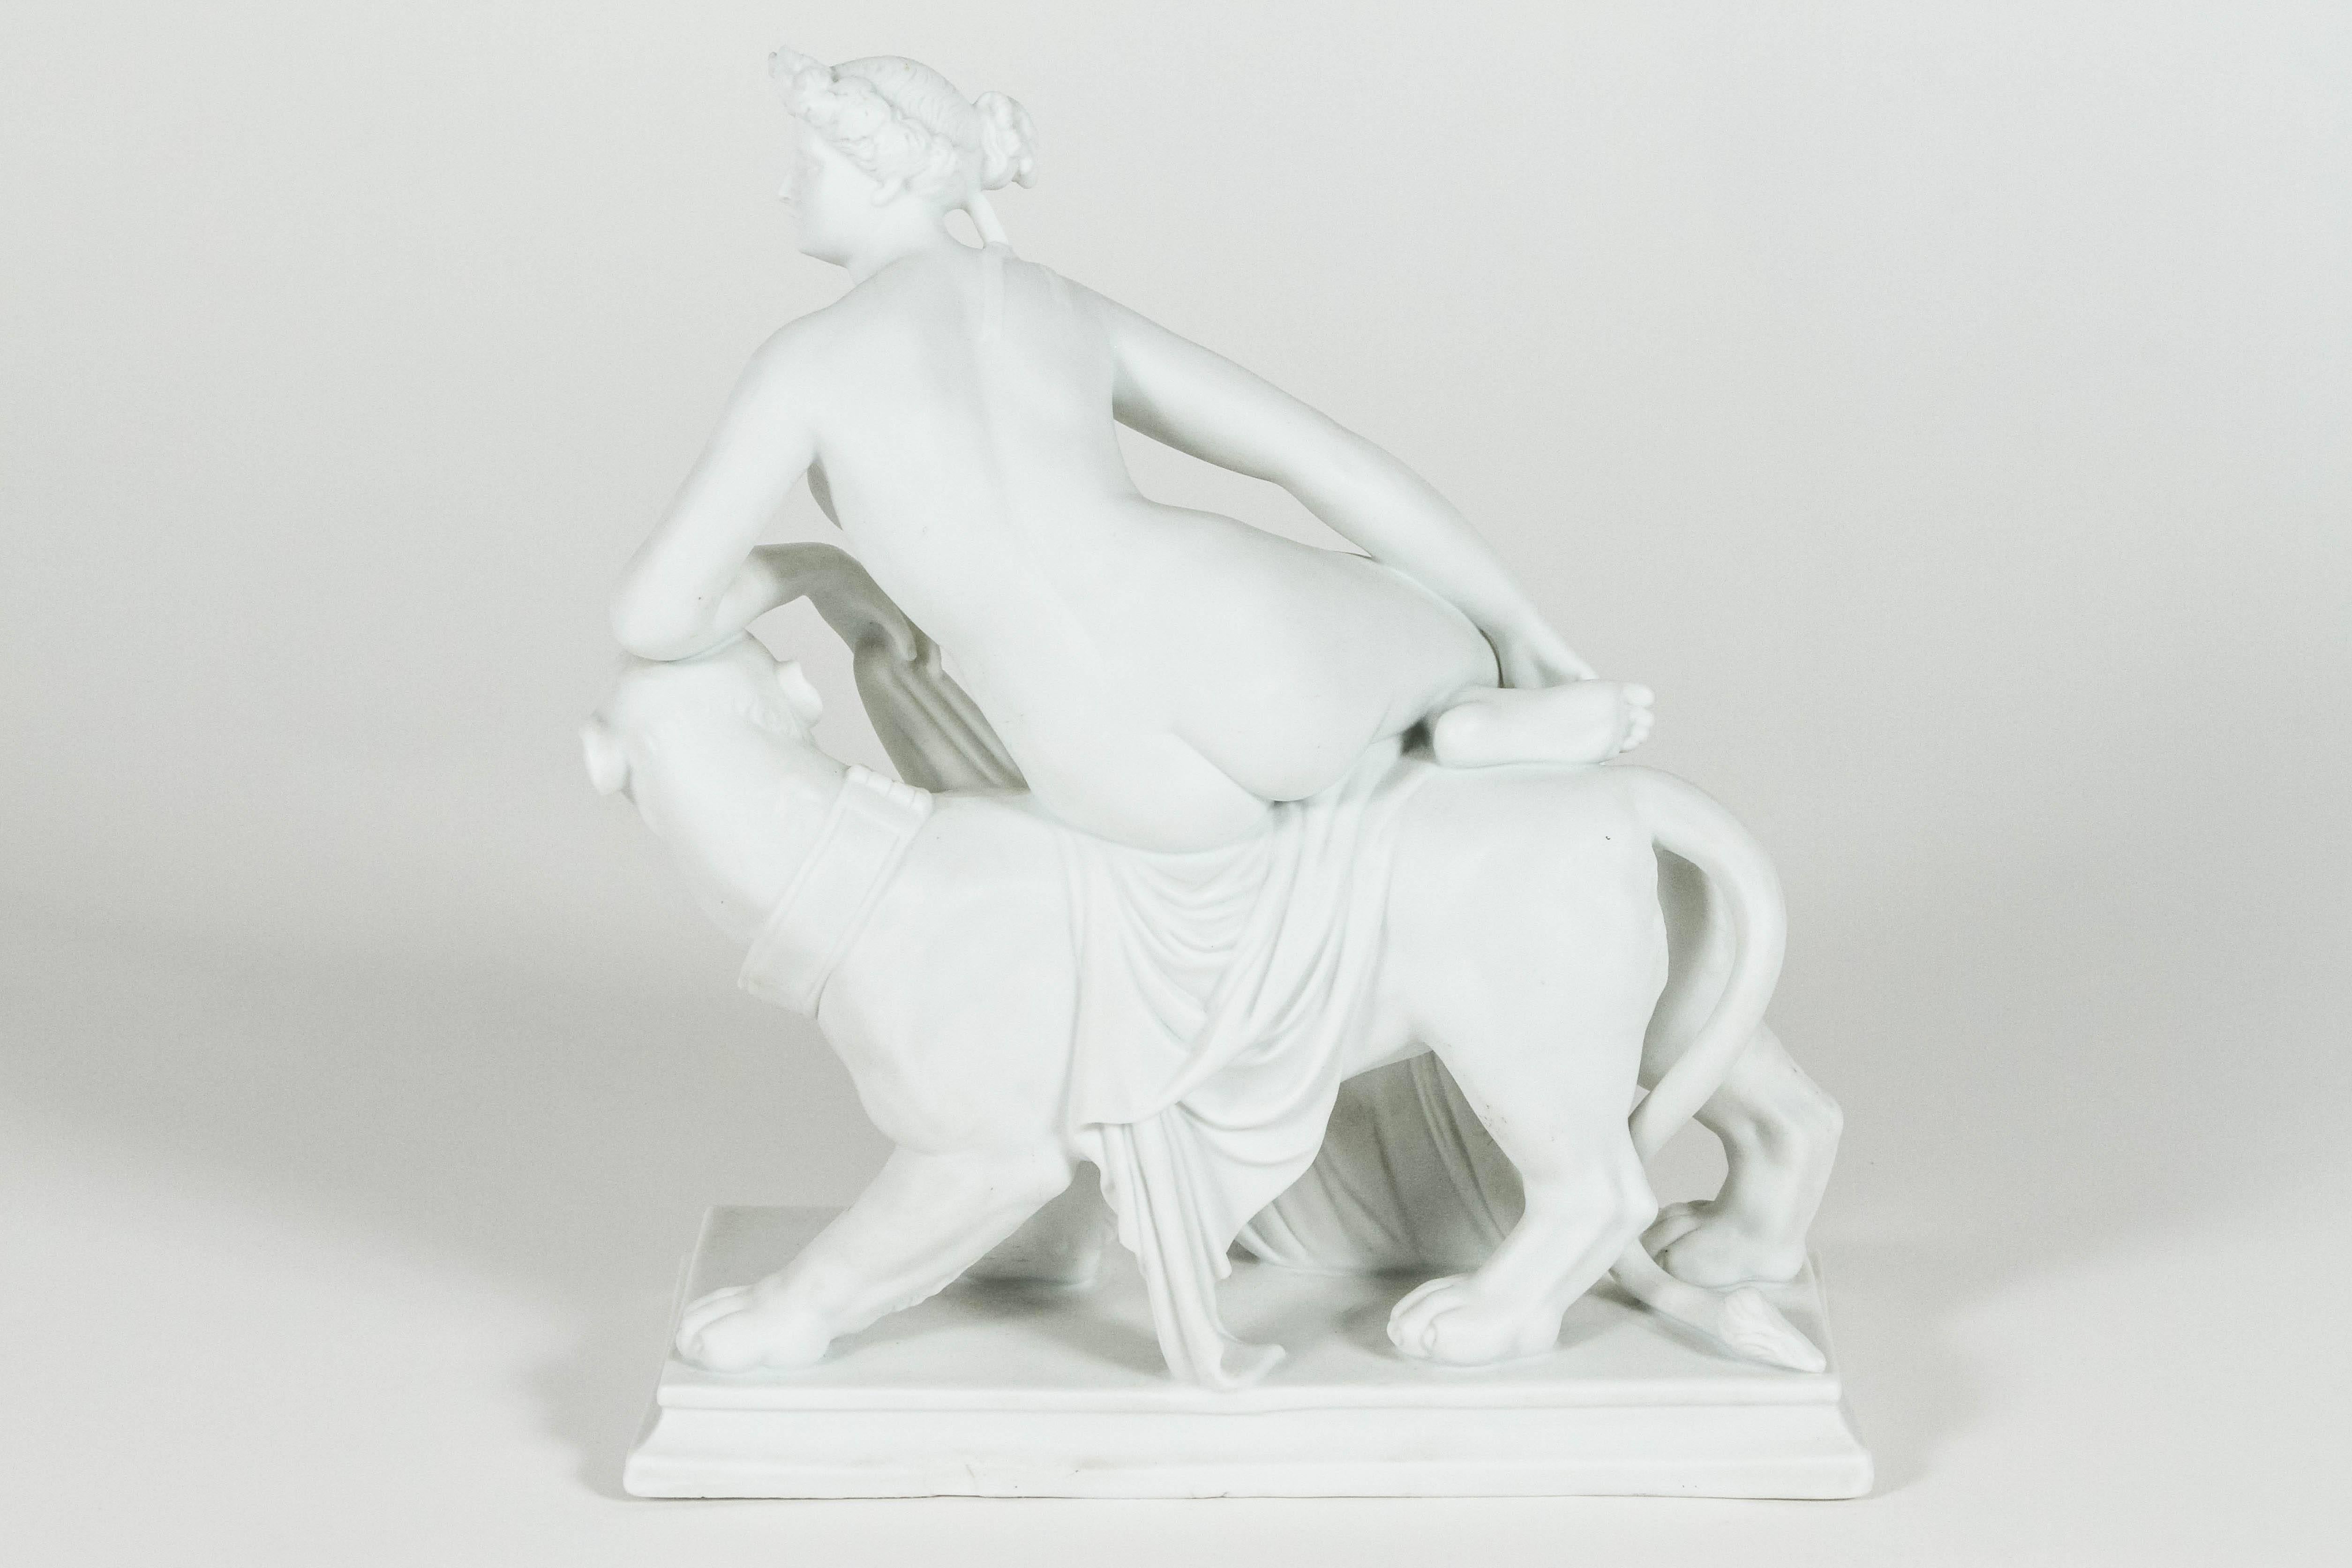 This lovely parian ware piece is in the style of a sculpture by Johann Heinrich von Dannecker and features the Classical Greek goddess Ariadne gracefully posed on the back of a panther. During the 19th century it was fashionable to have small